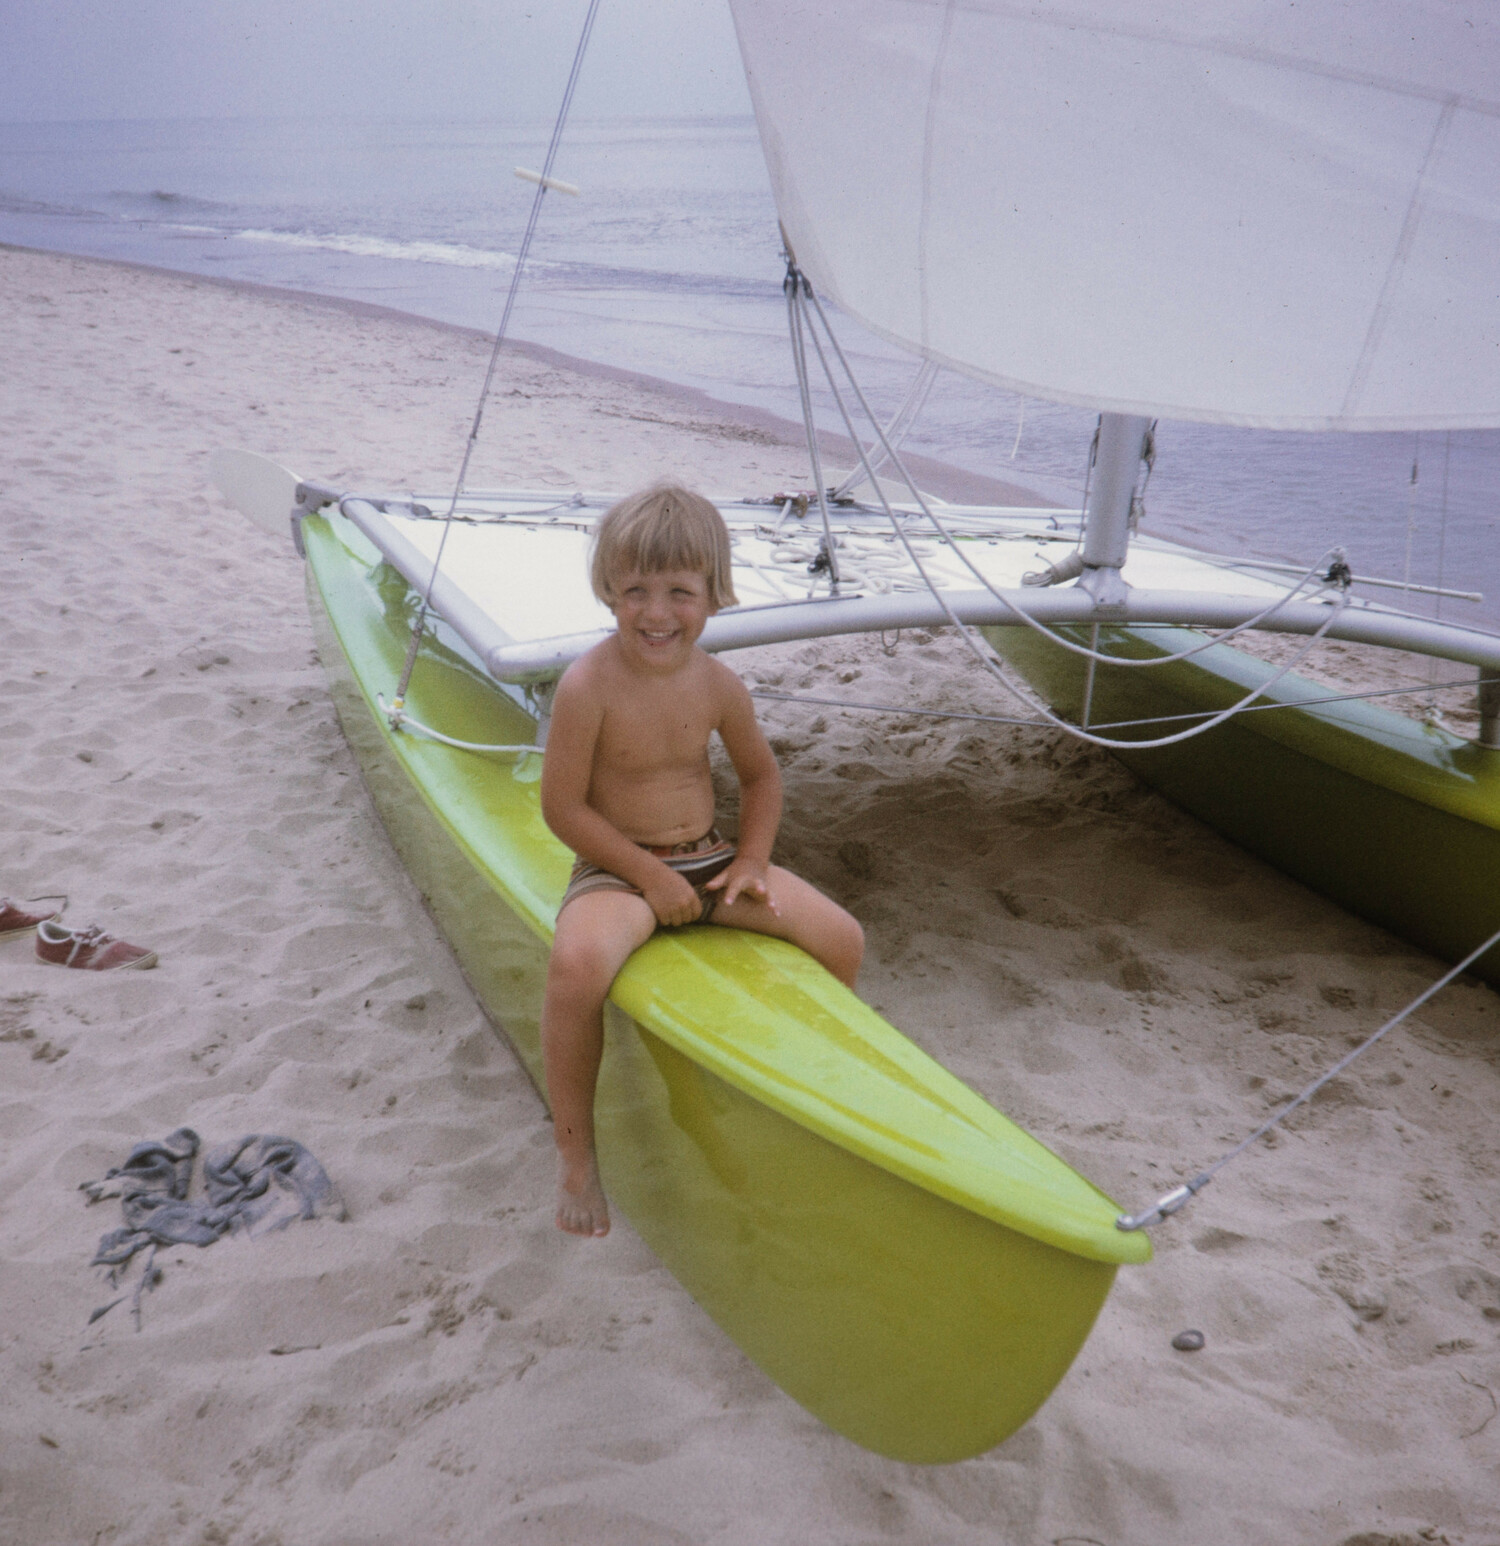 Nick Gazzolo has been sailing all his live, as evident in his photo, circa 1975, in Michigan on a Hobie 16.